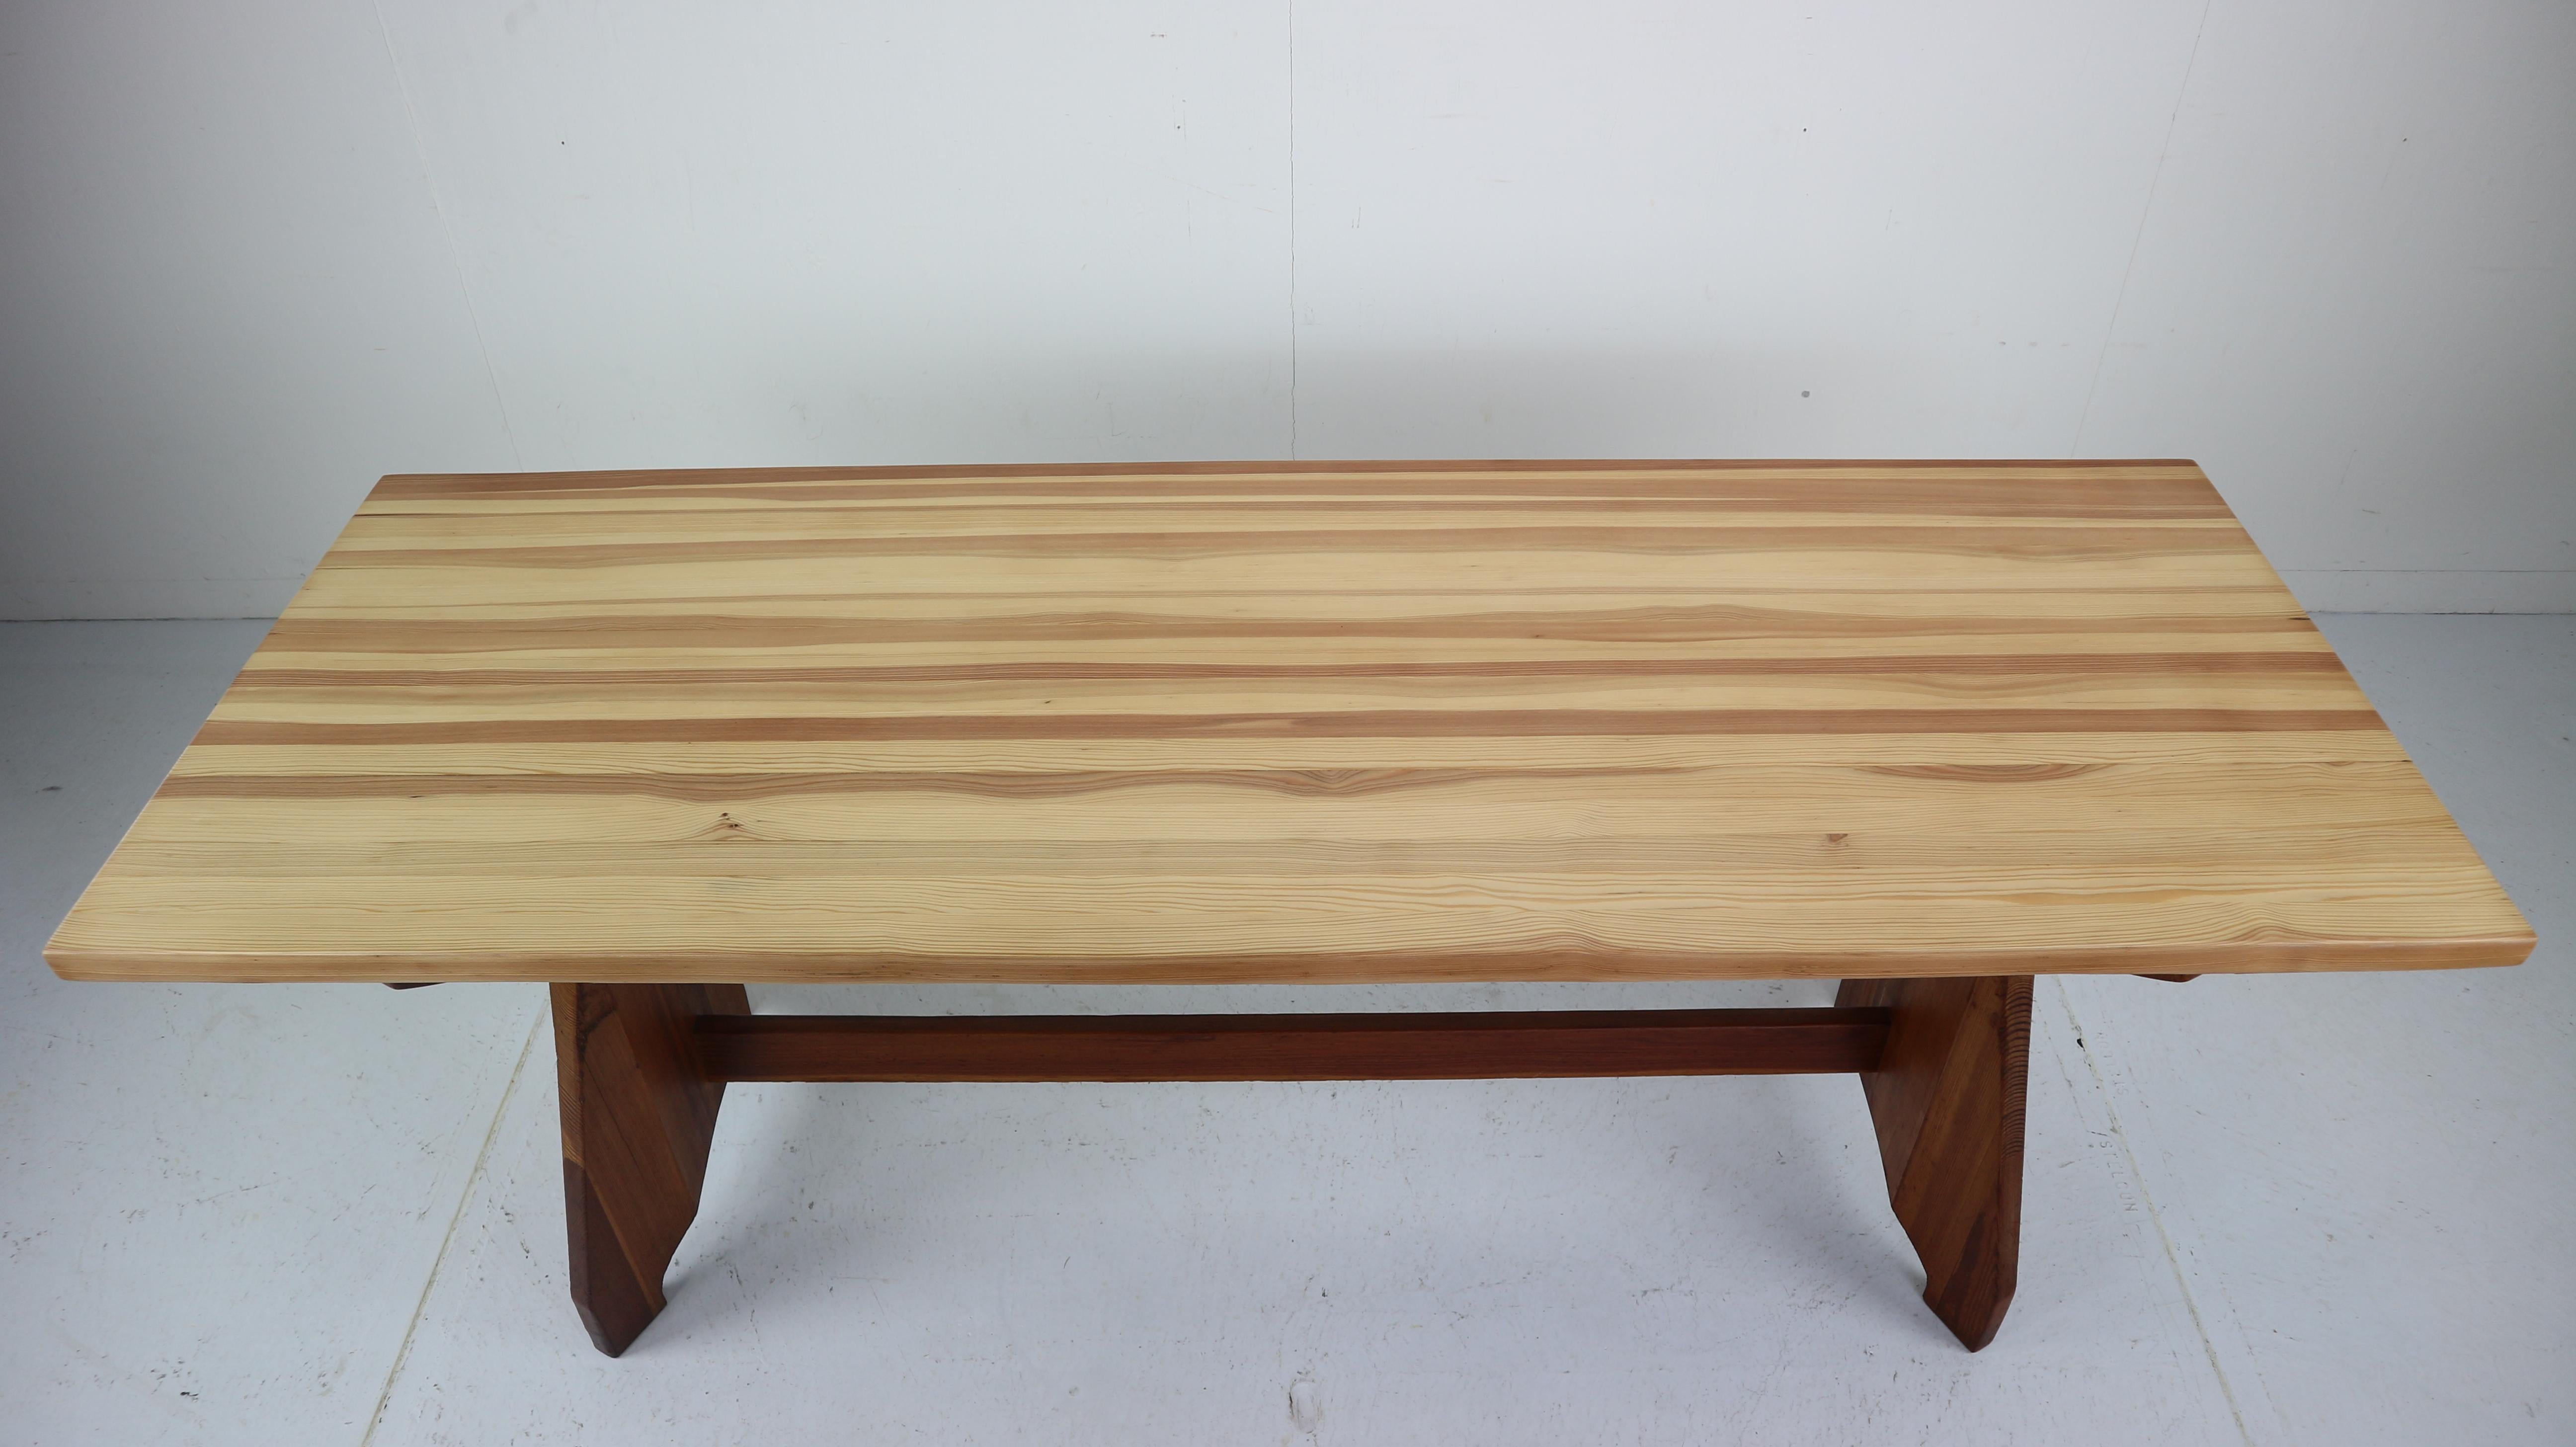 Handcrafted pine wooden table by Jacob Kielland Brandt, 1960s for Christiansen, Denmark.
This is a recognizable Scandinavian Modern period piece by its specific shape, elegant curves and construction method. The tabletop is refurbished and